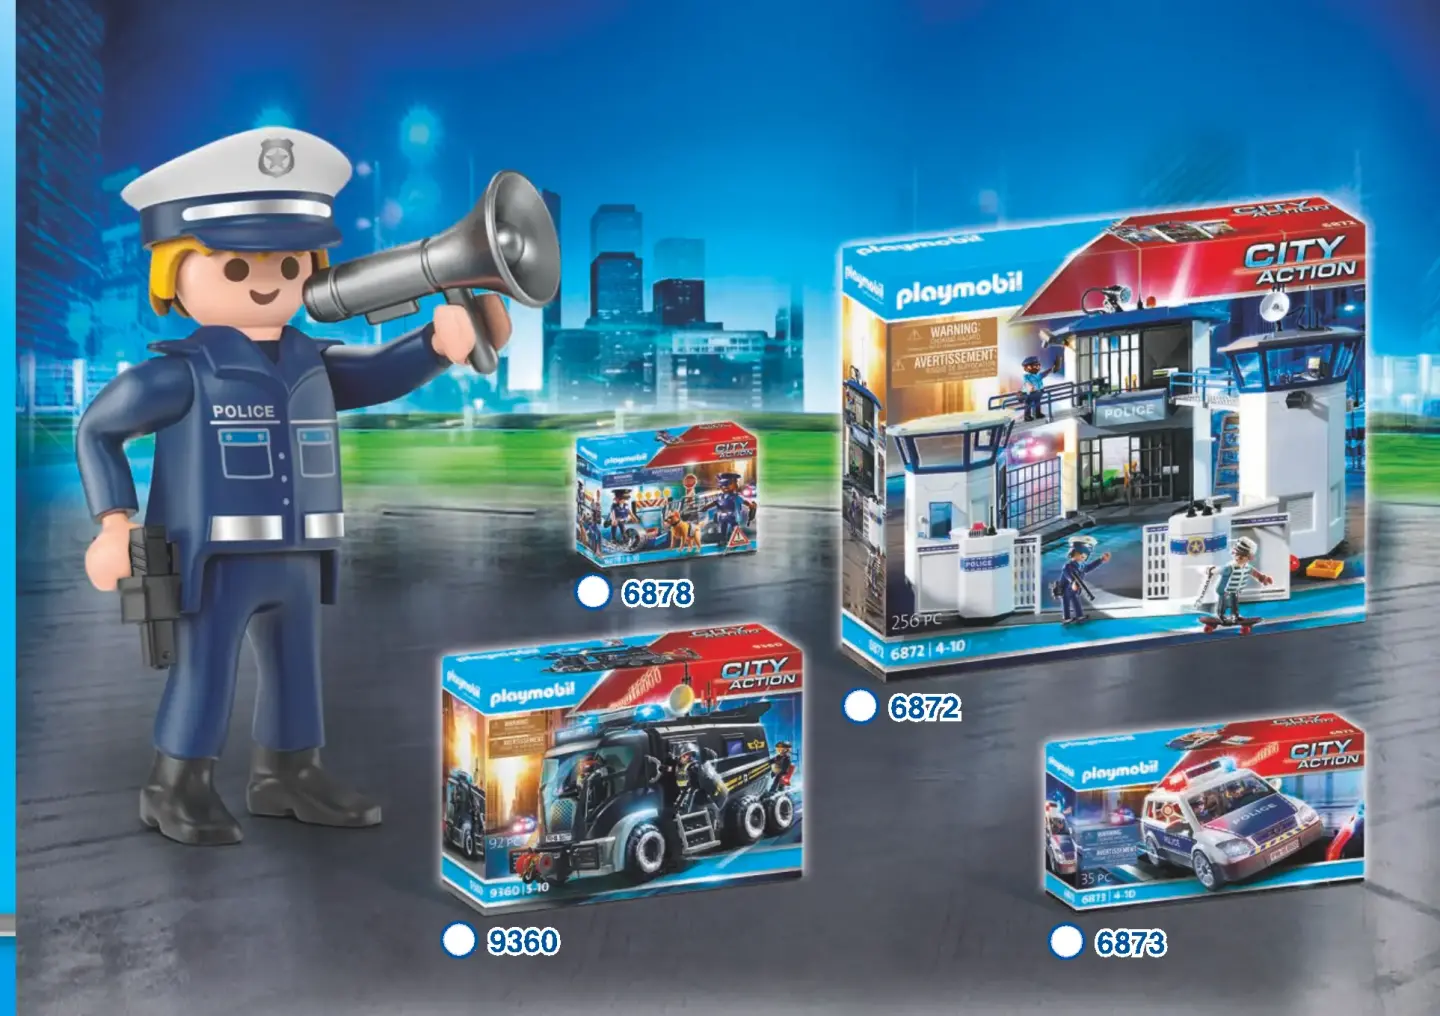 Playmobil Police Helicopter Pursuit with Runaway Van